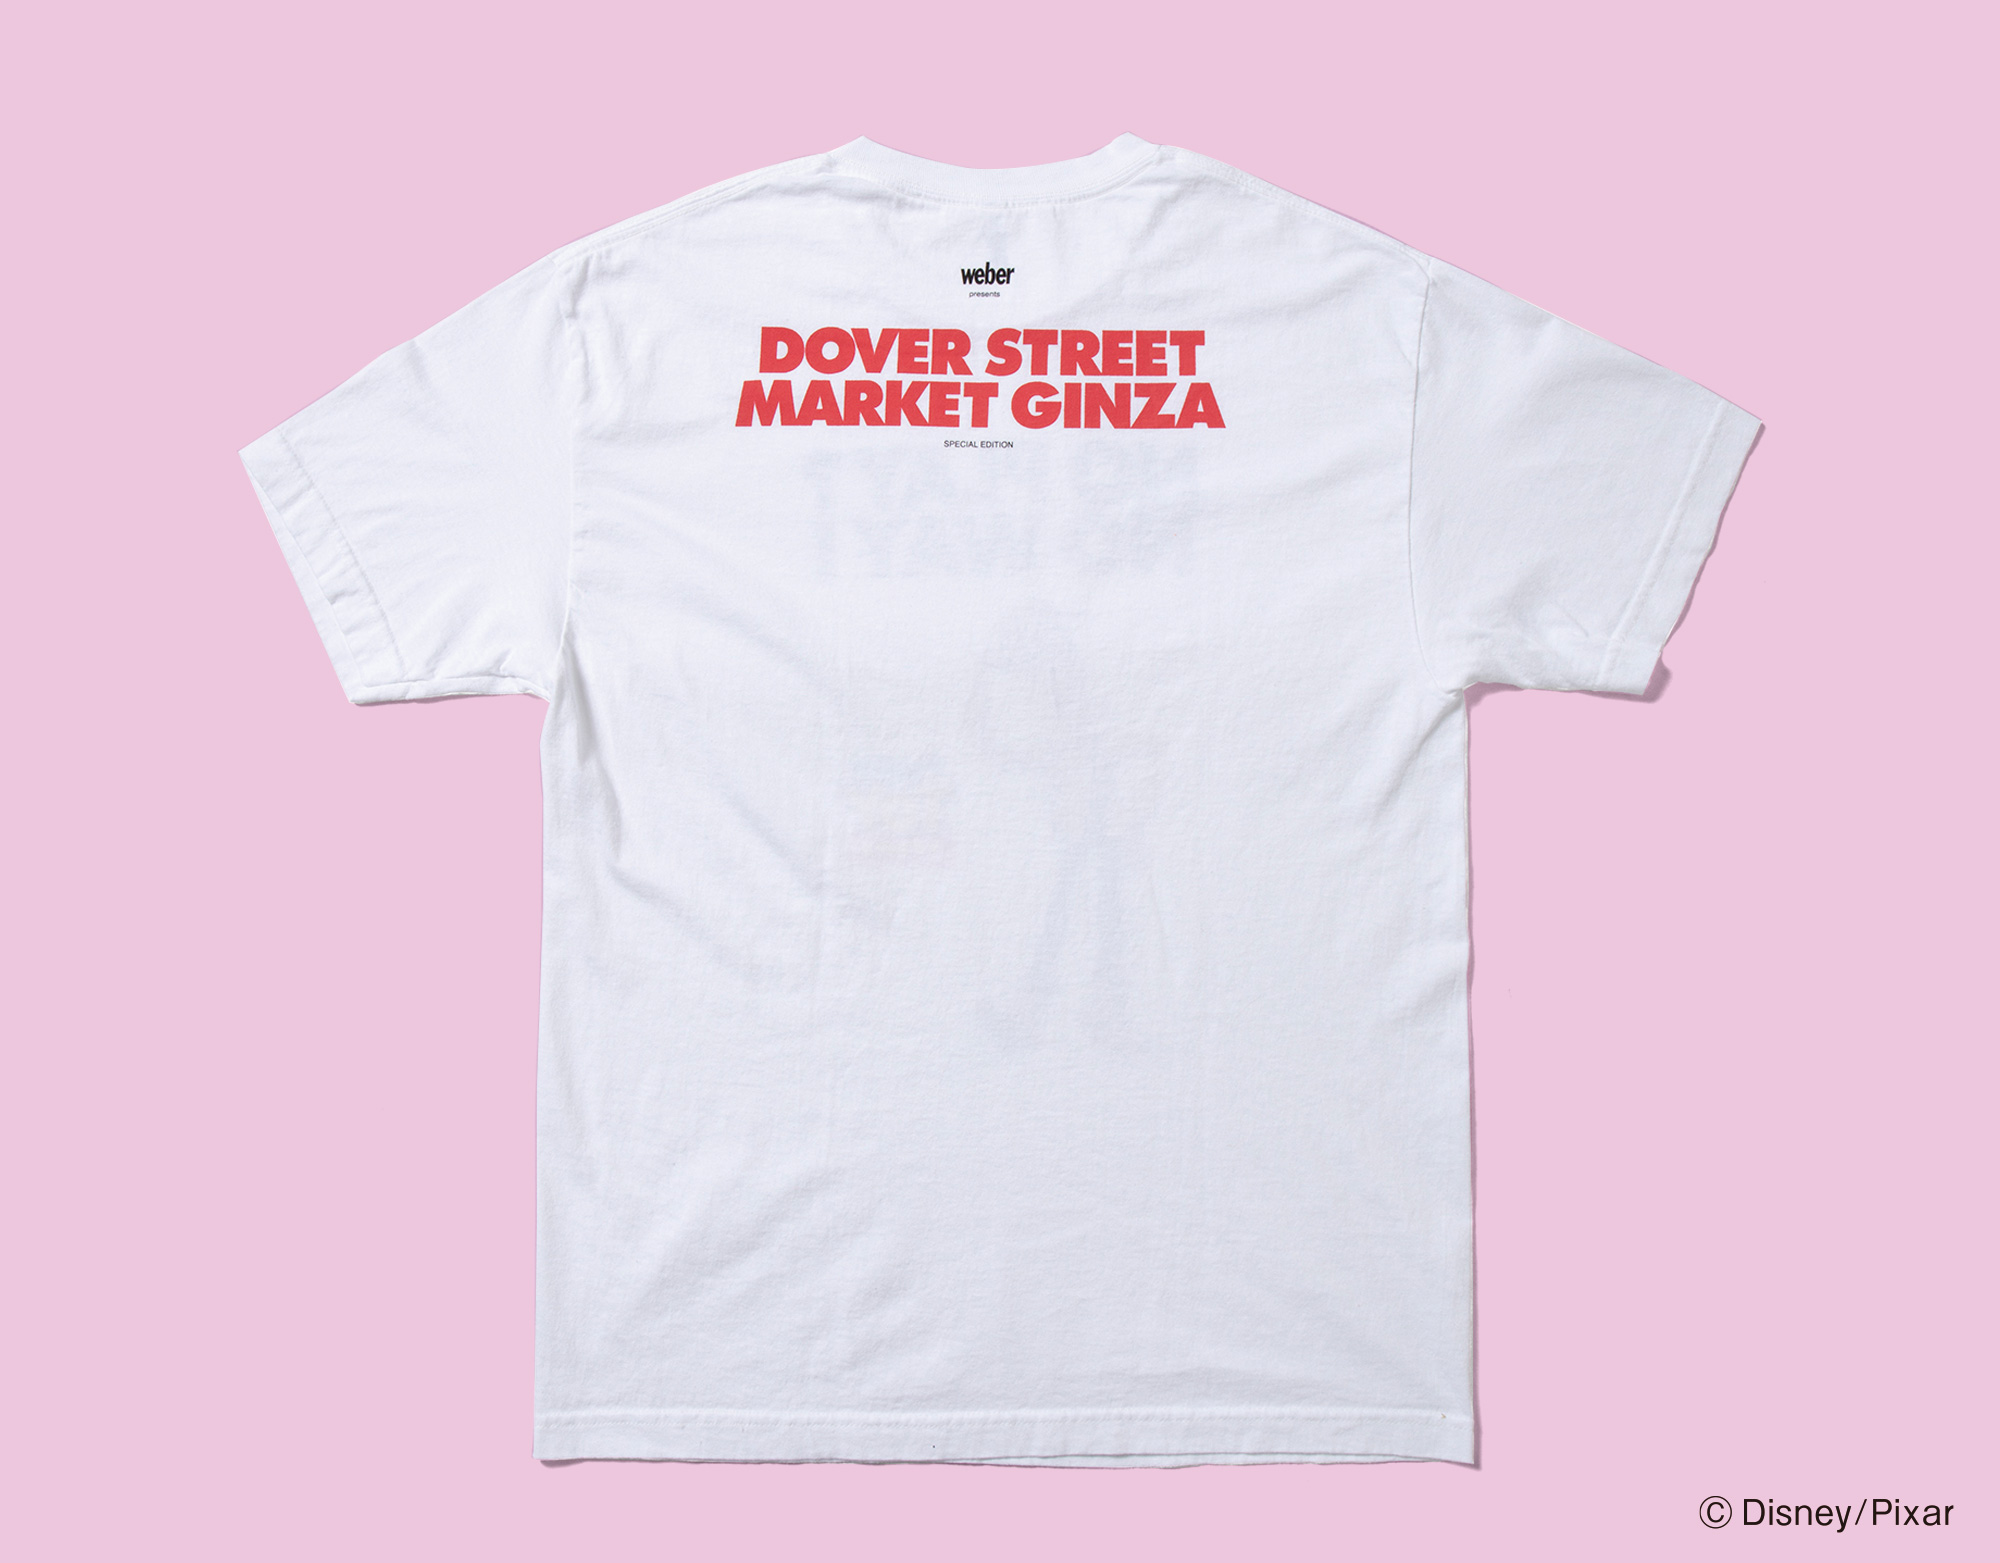 weber TOY STORY -DOVER STREET MARKET GINZA EXCLUSIVE- – JUN WATANABE